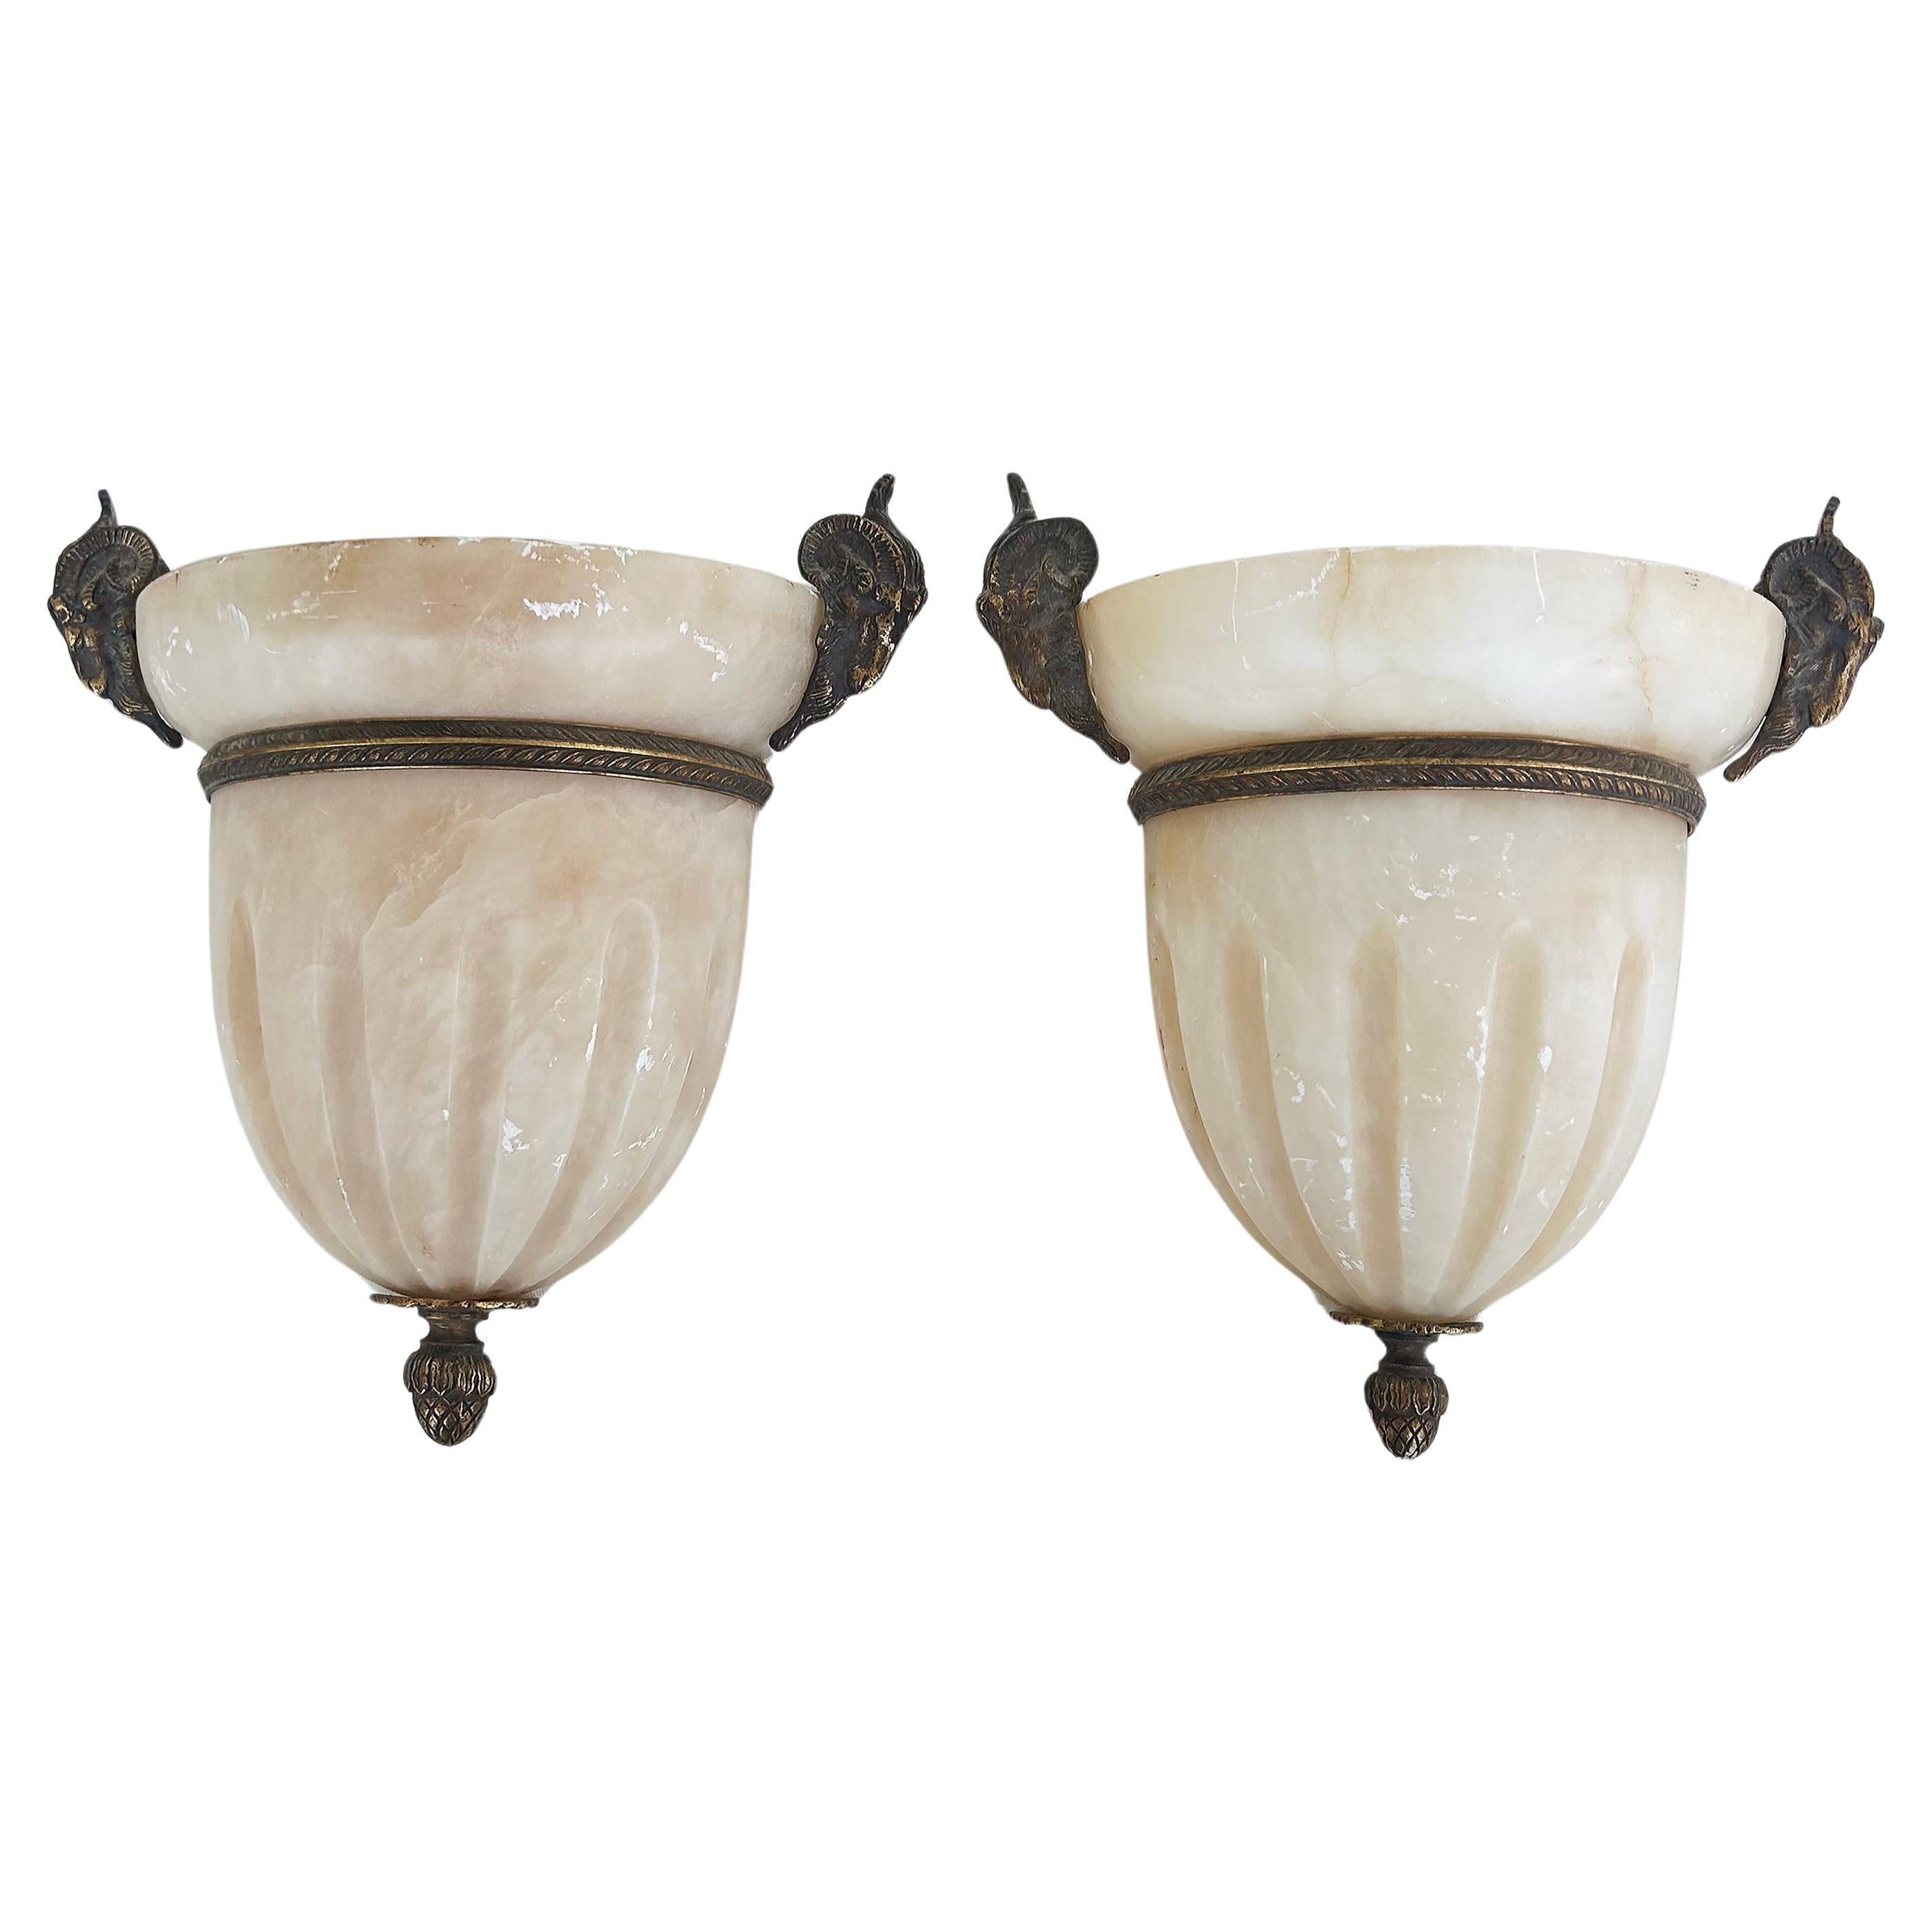 Alabaster Gilt Bronze Ram's Head Wall Sconces by Mariner, S.A., Spain, Pair For Sale